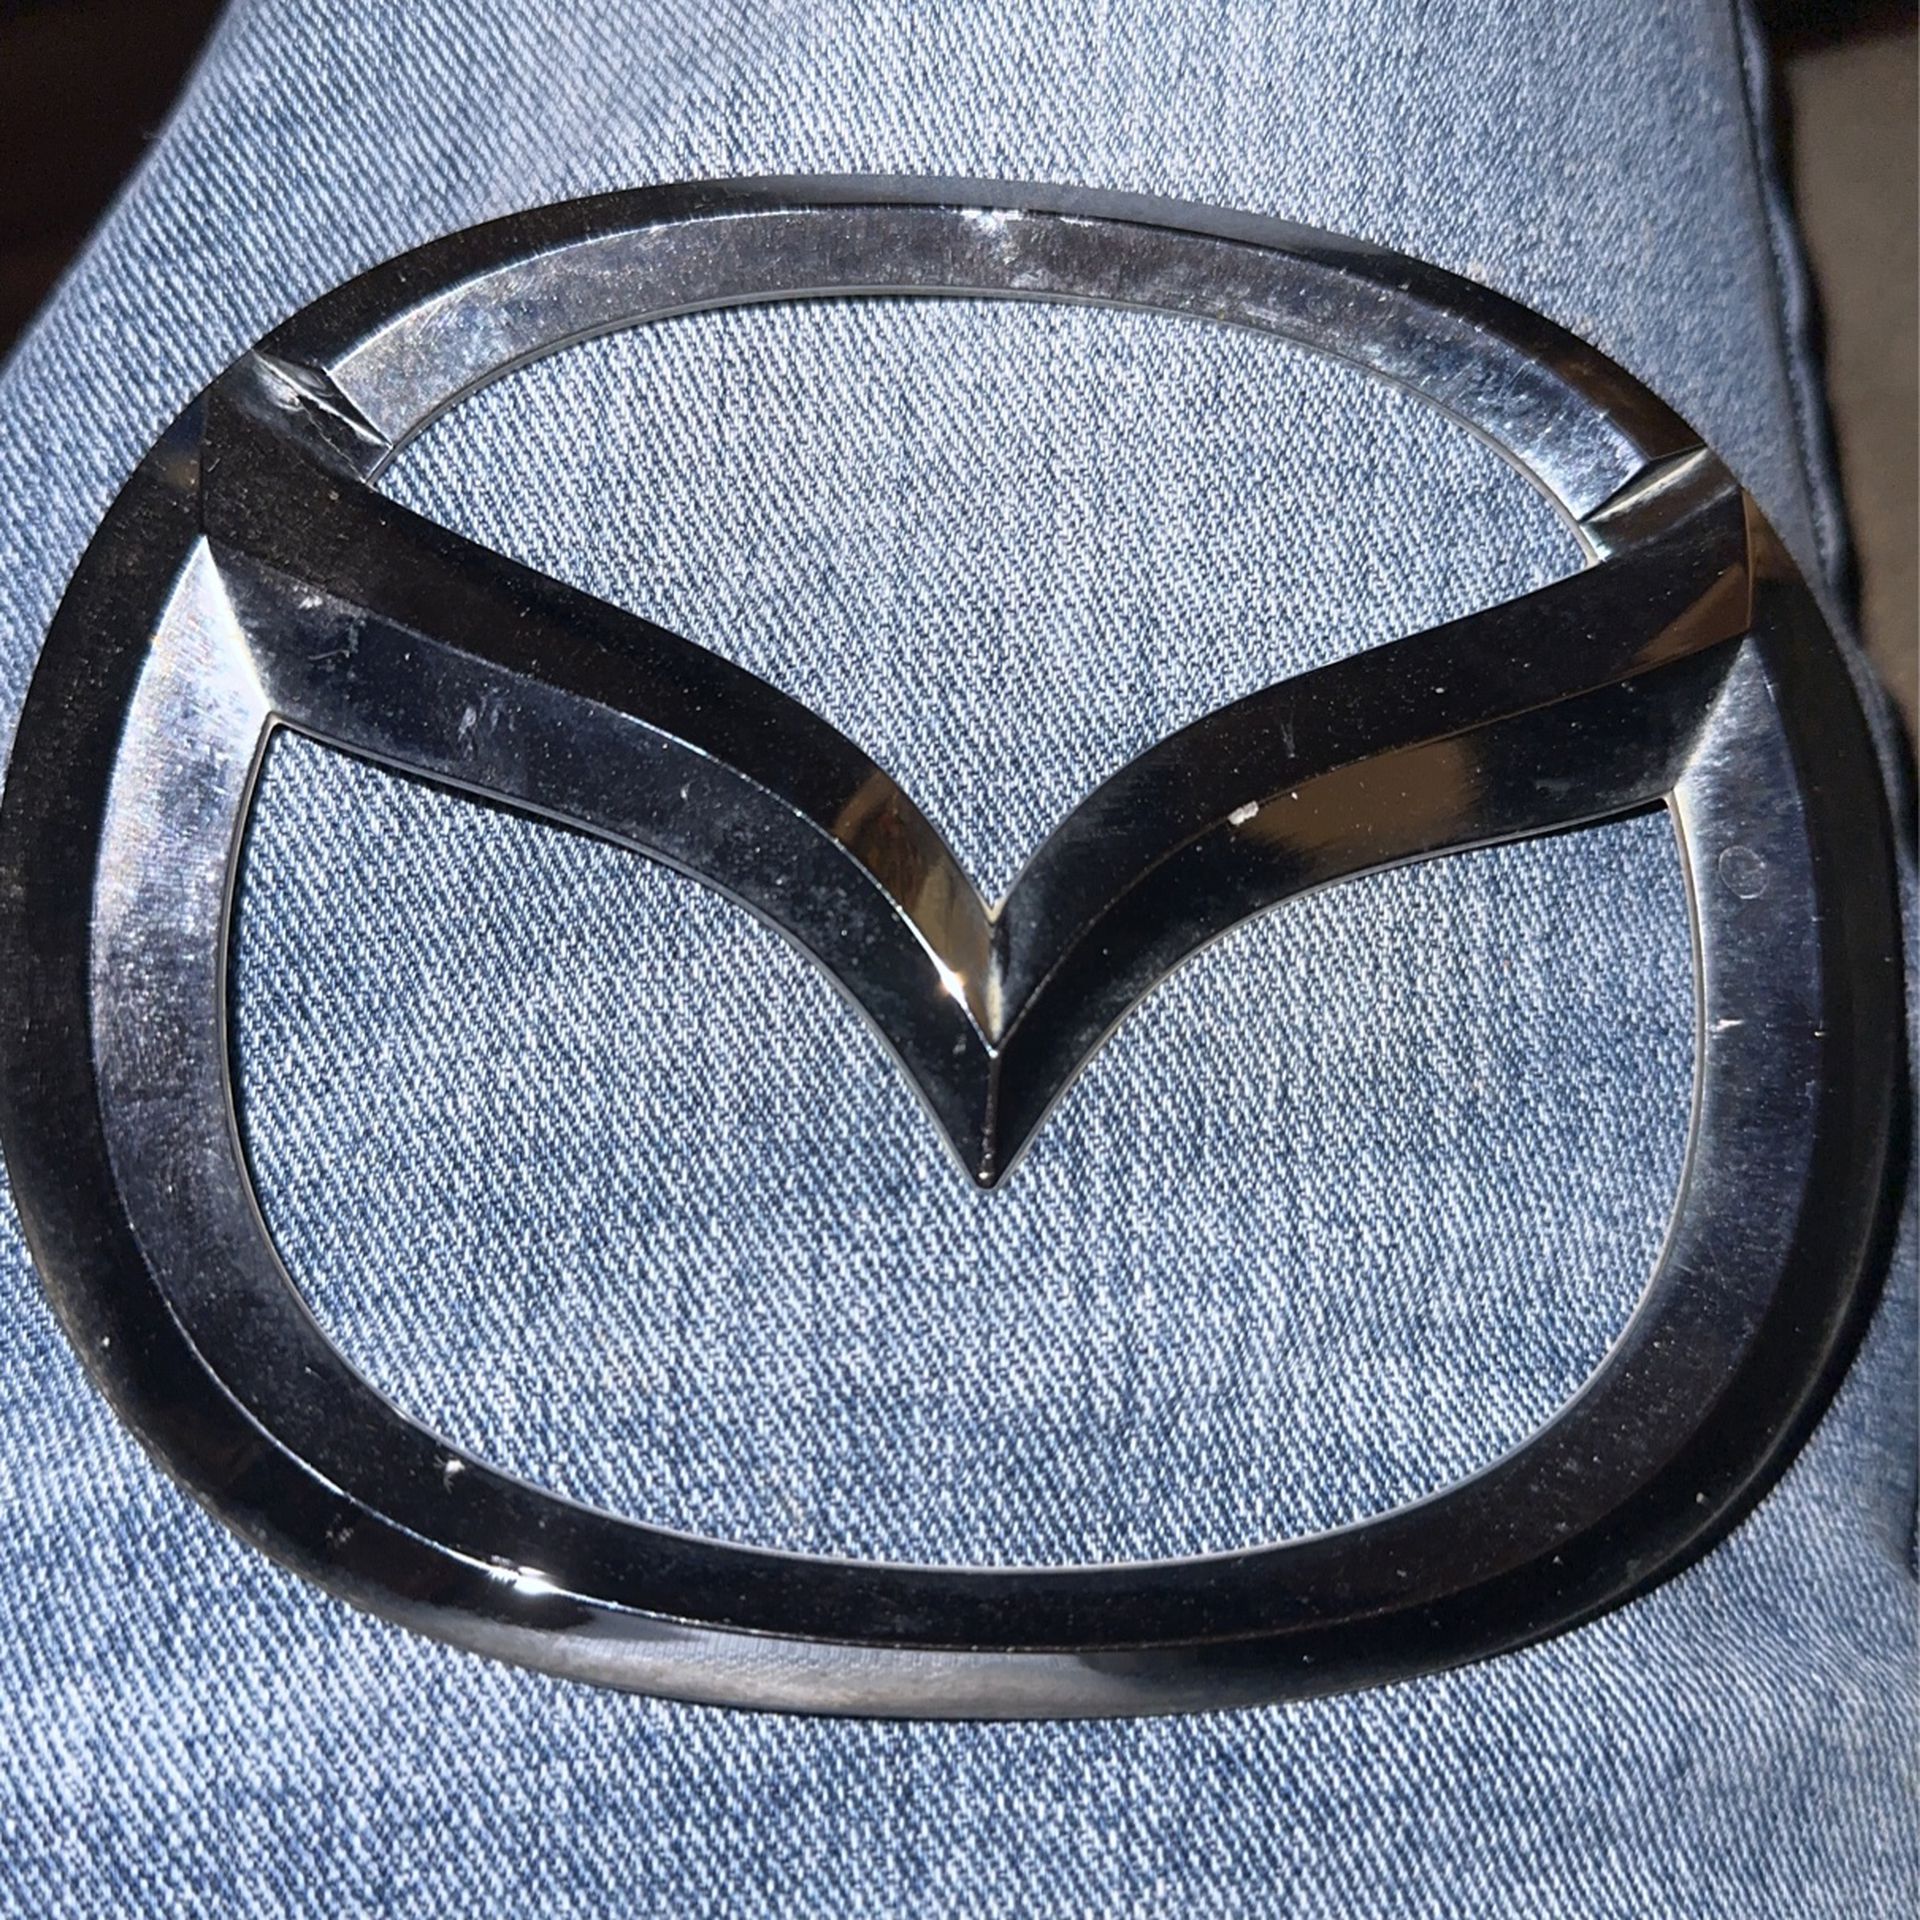 Mazda Emblem serious buyers only